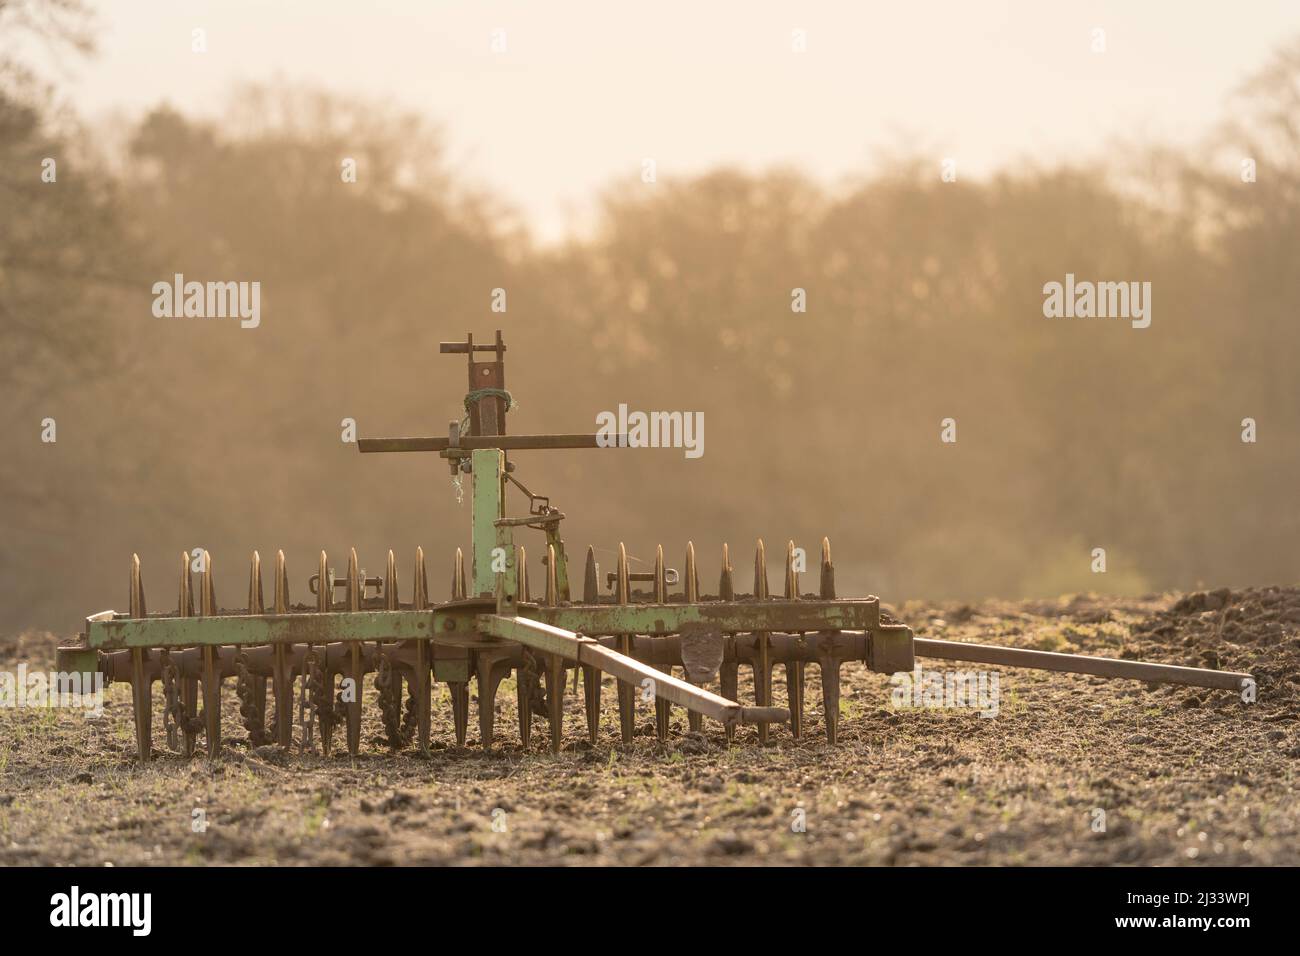 A farmers mechanical ground rake in a field backlit with early morning sunshine Stock Photo